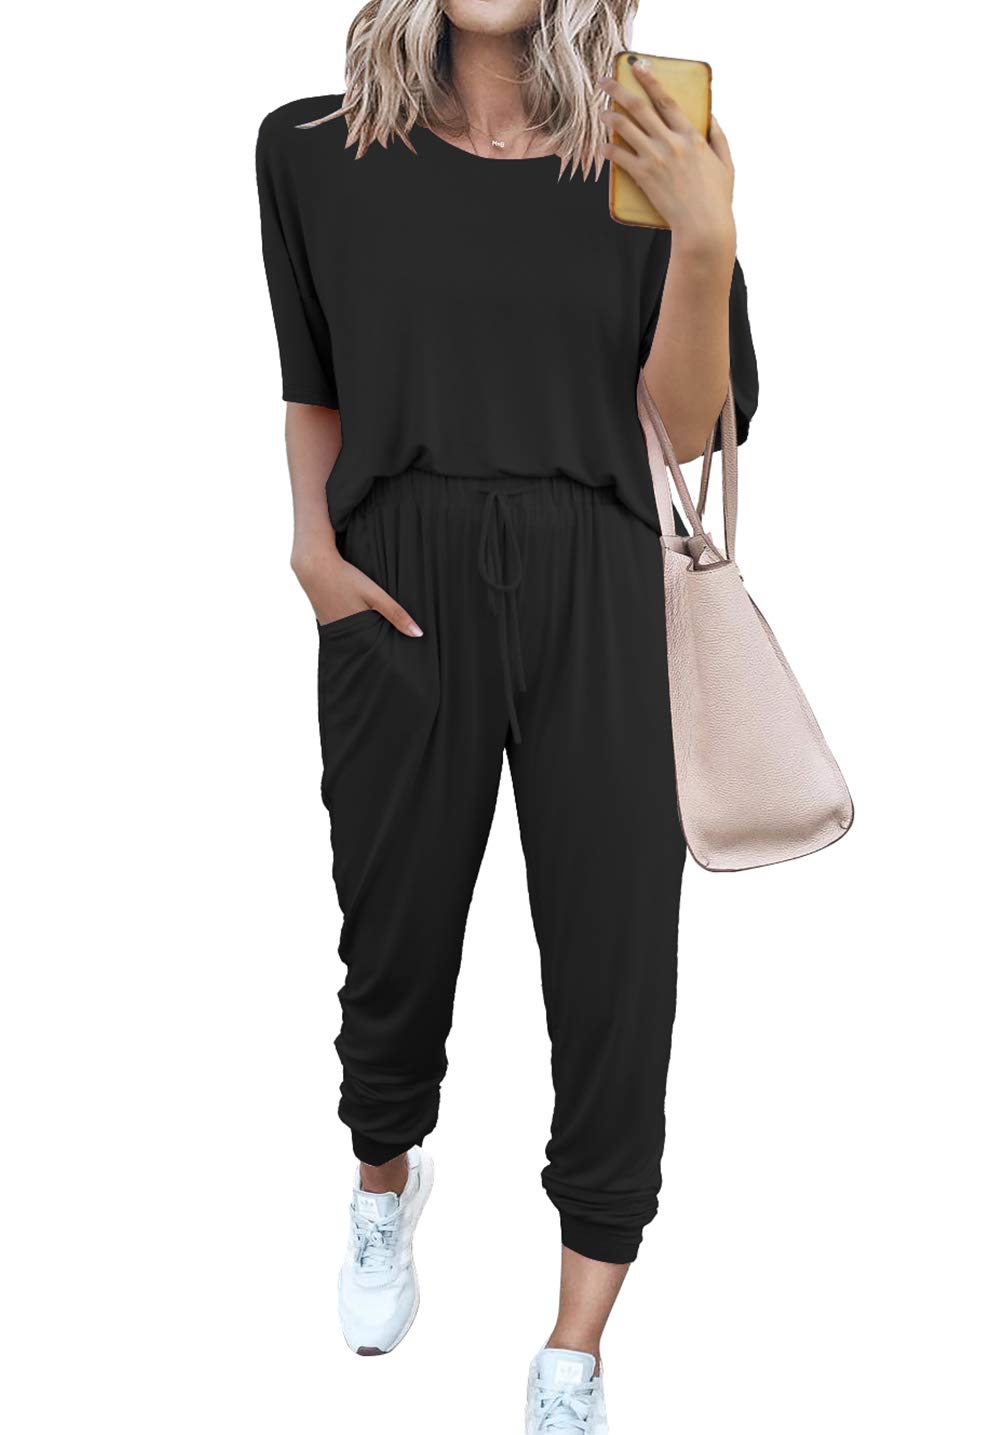 PRETTYGARDEN Women's Two Piece Outfit Short Sleeve Pullover with Drawstring  Long Pants Tracksuit Jogger Set A-black Medium